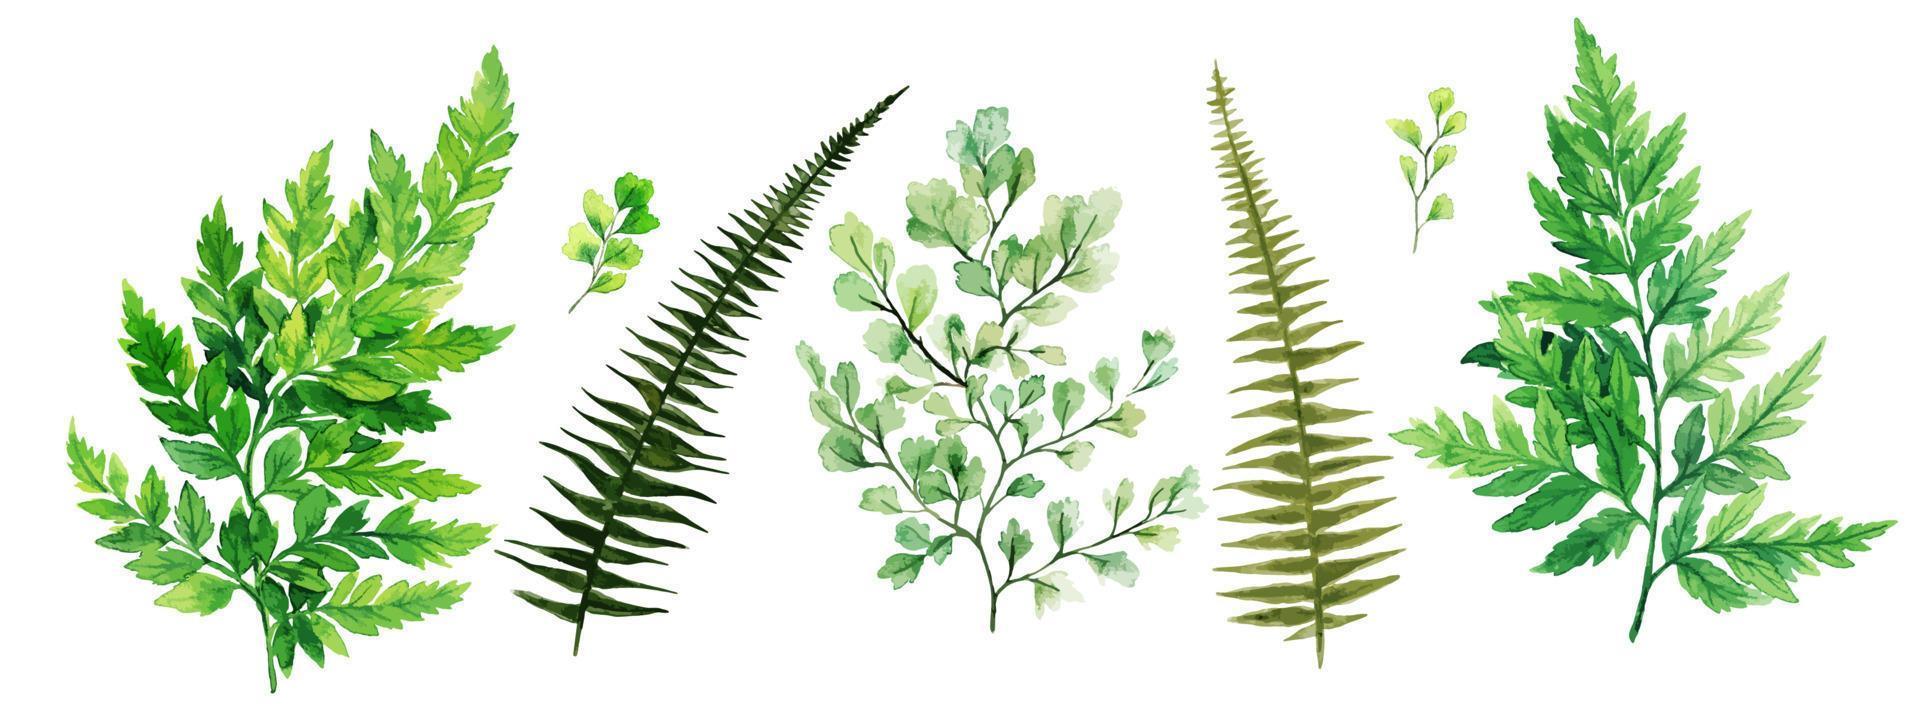 Wild flora, ferns and adiantum, Watercolor bright greenery collection, hand drawn vector illustration.